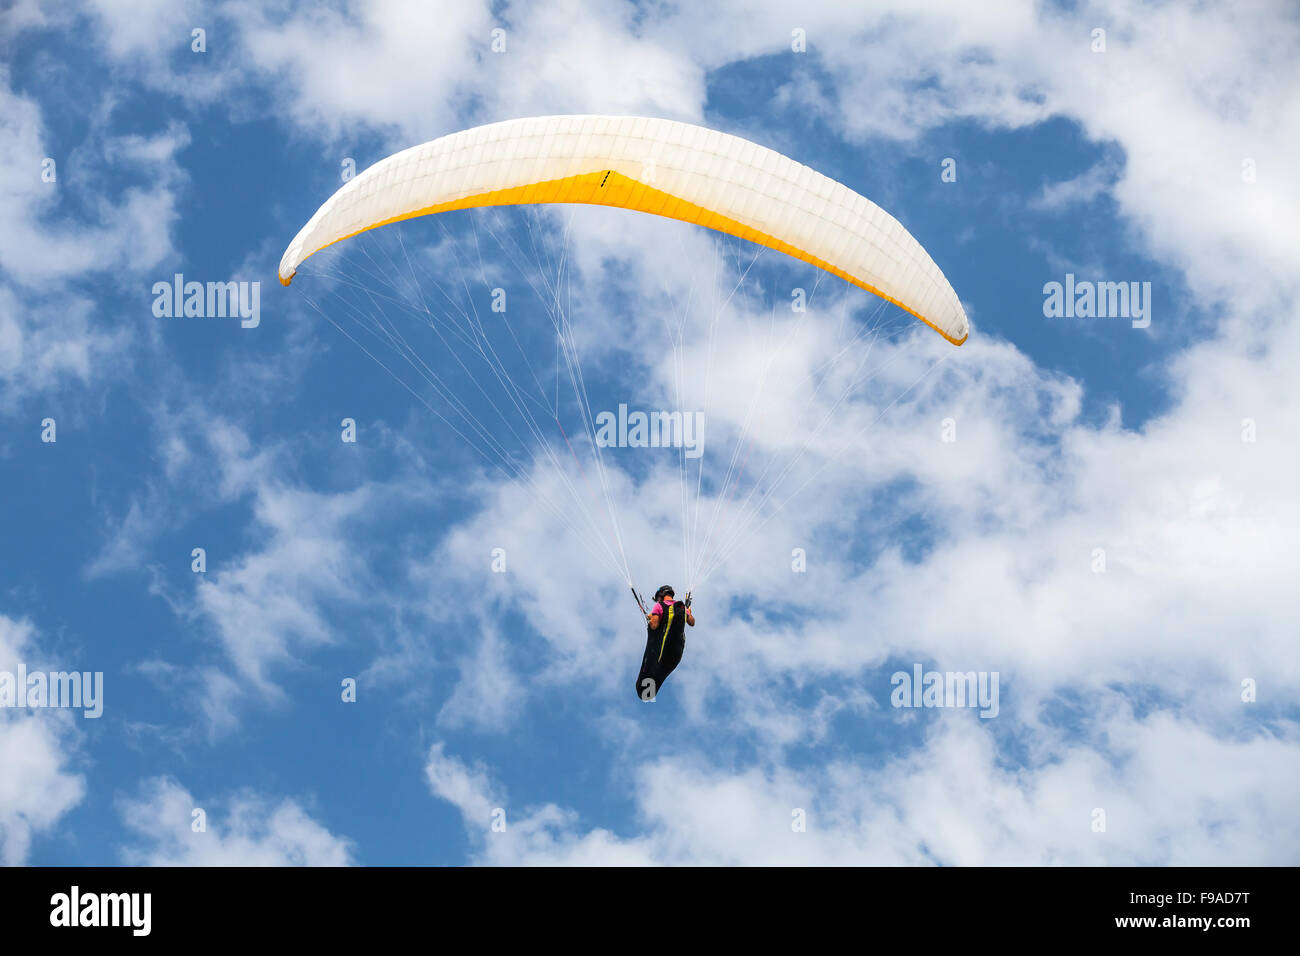 Burgas, Bulgaria - July 23, 2014: Amateur paraglider in blue cloudy sky Stock Photo